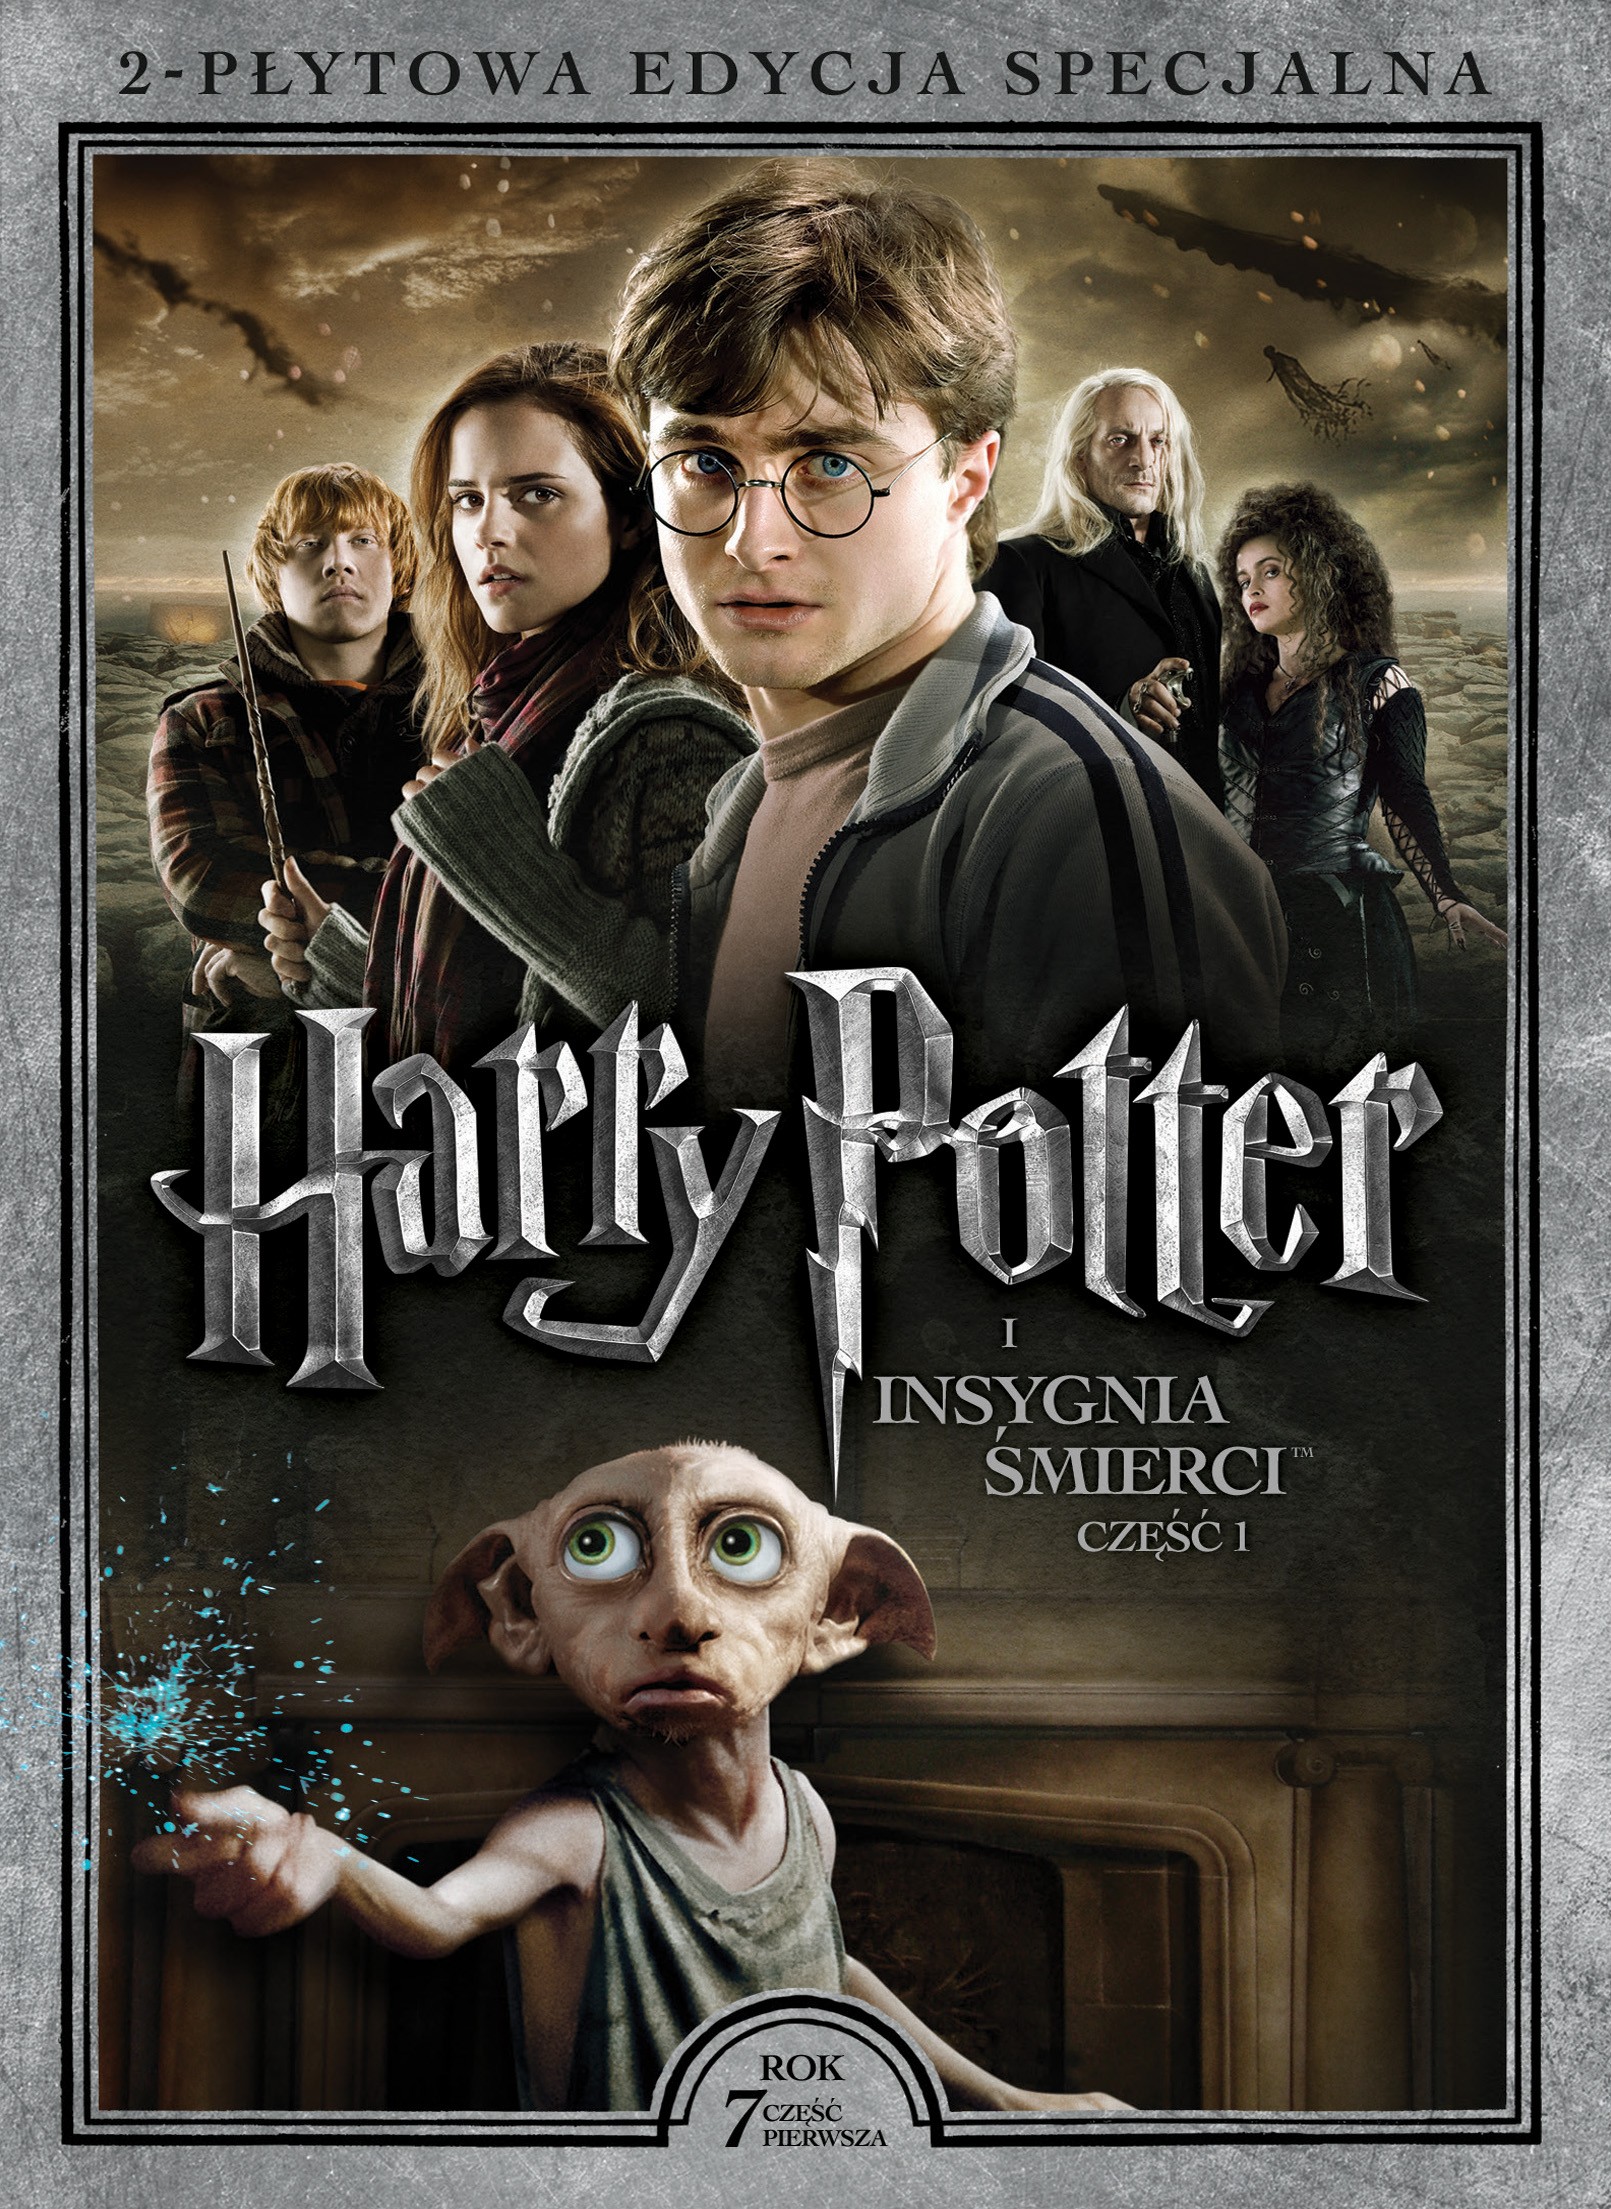 _pressroom_materialy_0_Harry_Potter7A_DVD_2D.jpg